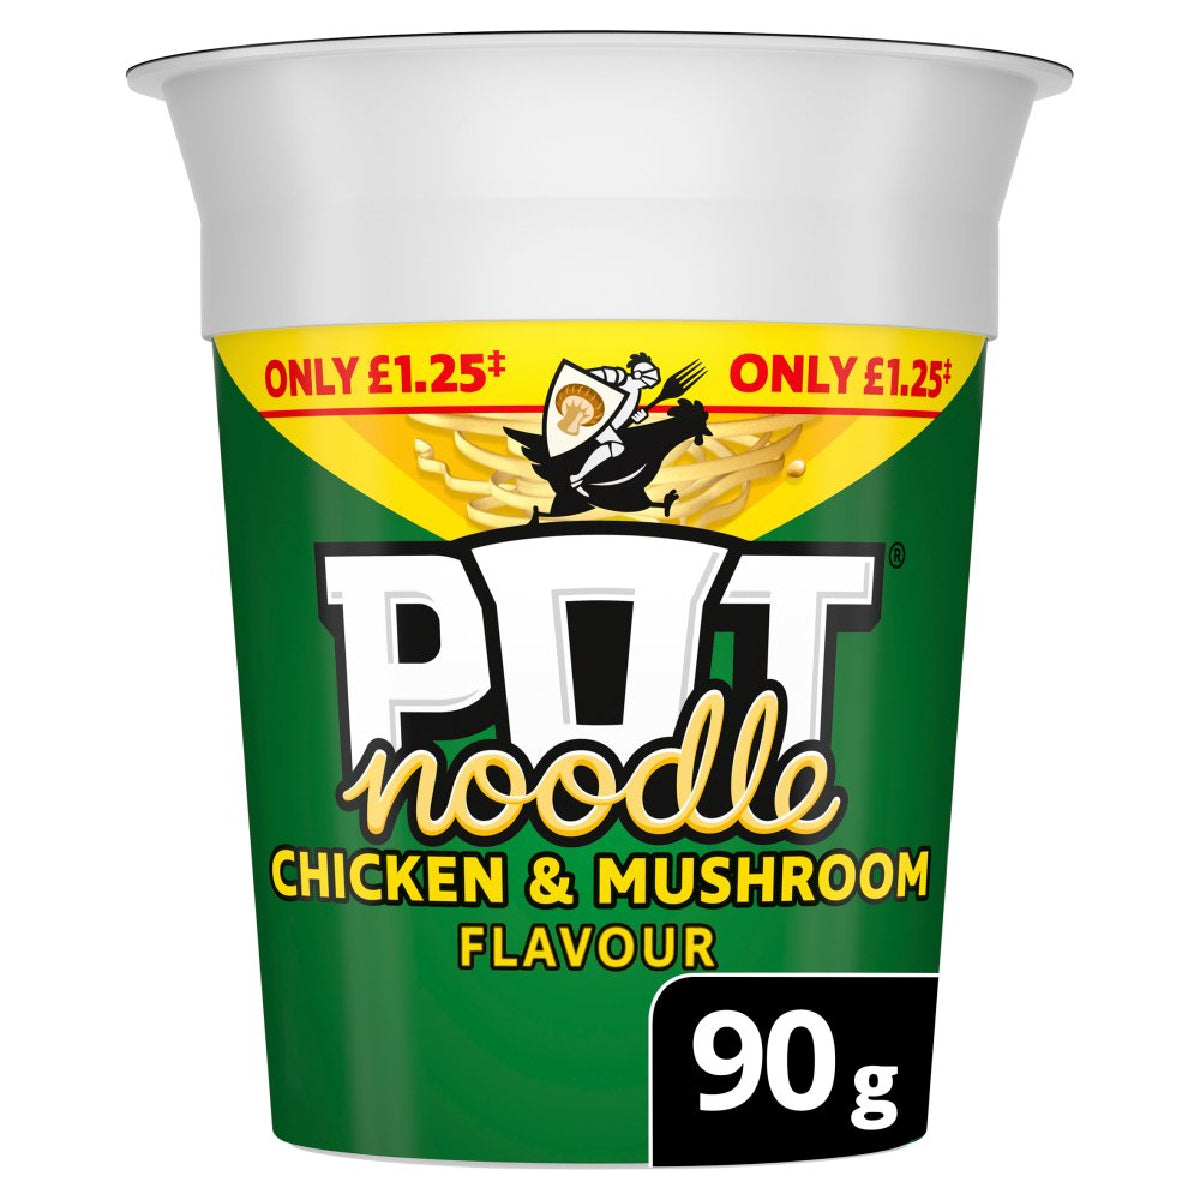 Pot noodle - Chicken & Mushroom Flavour - 90g - Continental Food Store